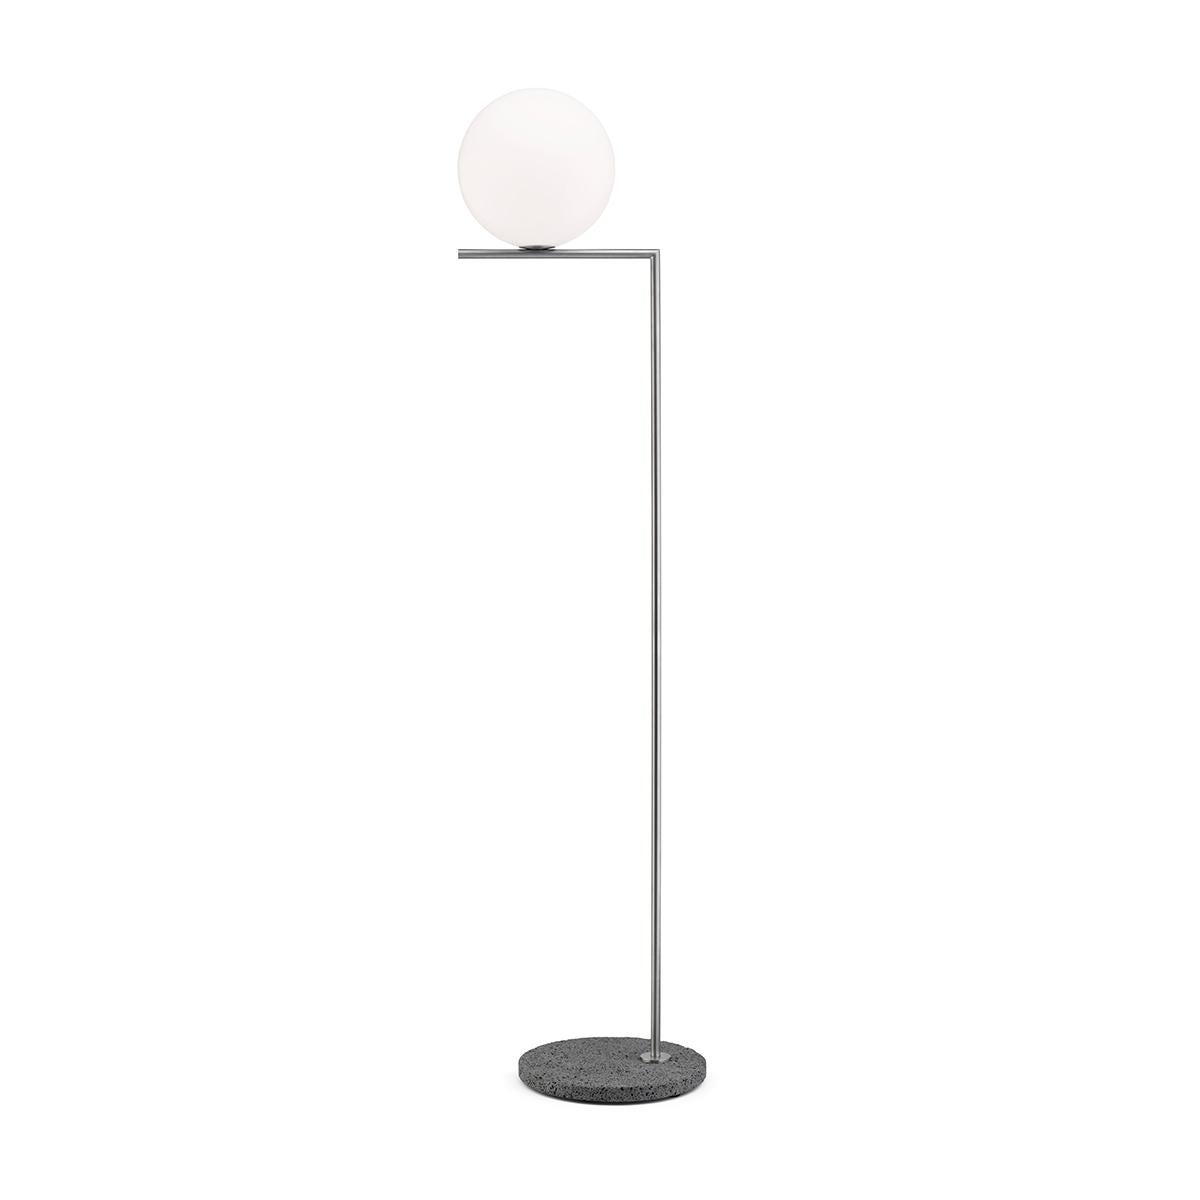 For Sale: Gray (Stainless Steel / Occhio di Pernice Base) Flos IC Lights F2 Outdoor Floor Lamp by Michael Anastassiades